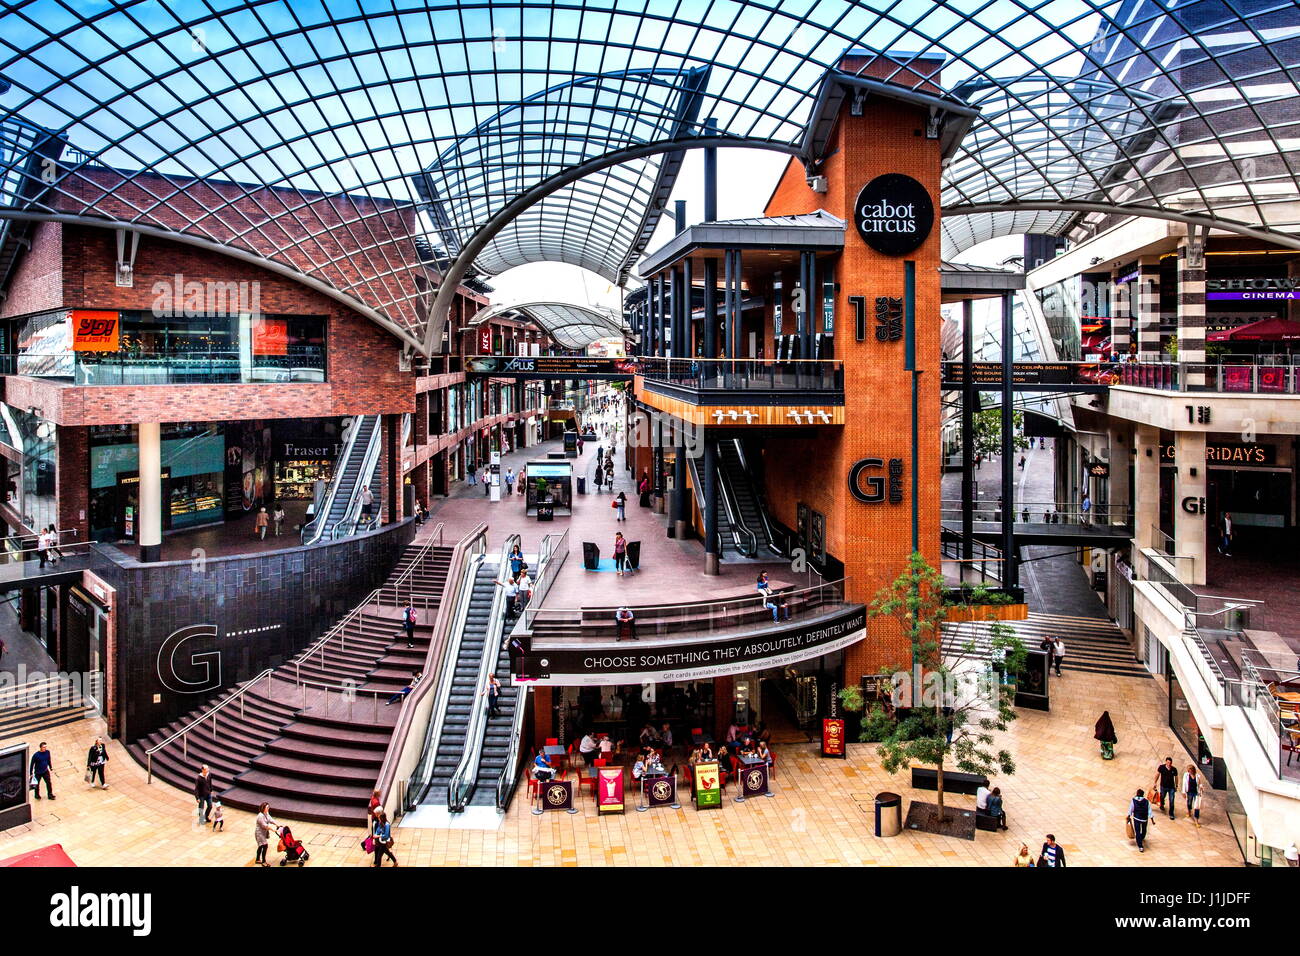 Le centre commercial Cabot Circus, Bristol, Angleterre Banque D'Images